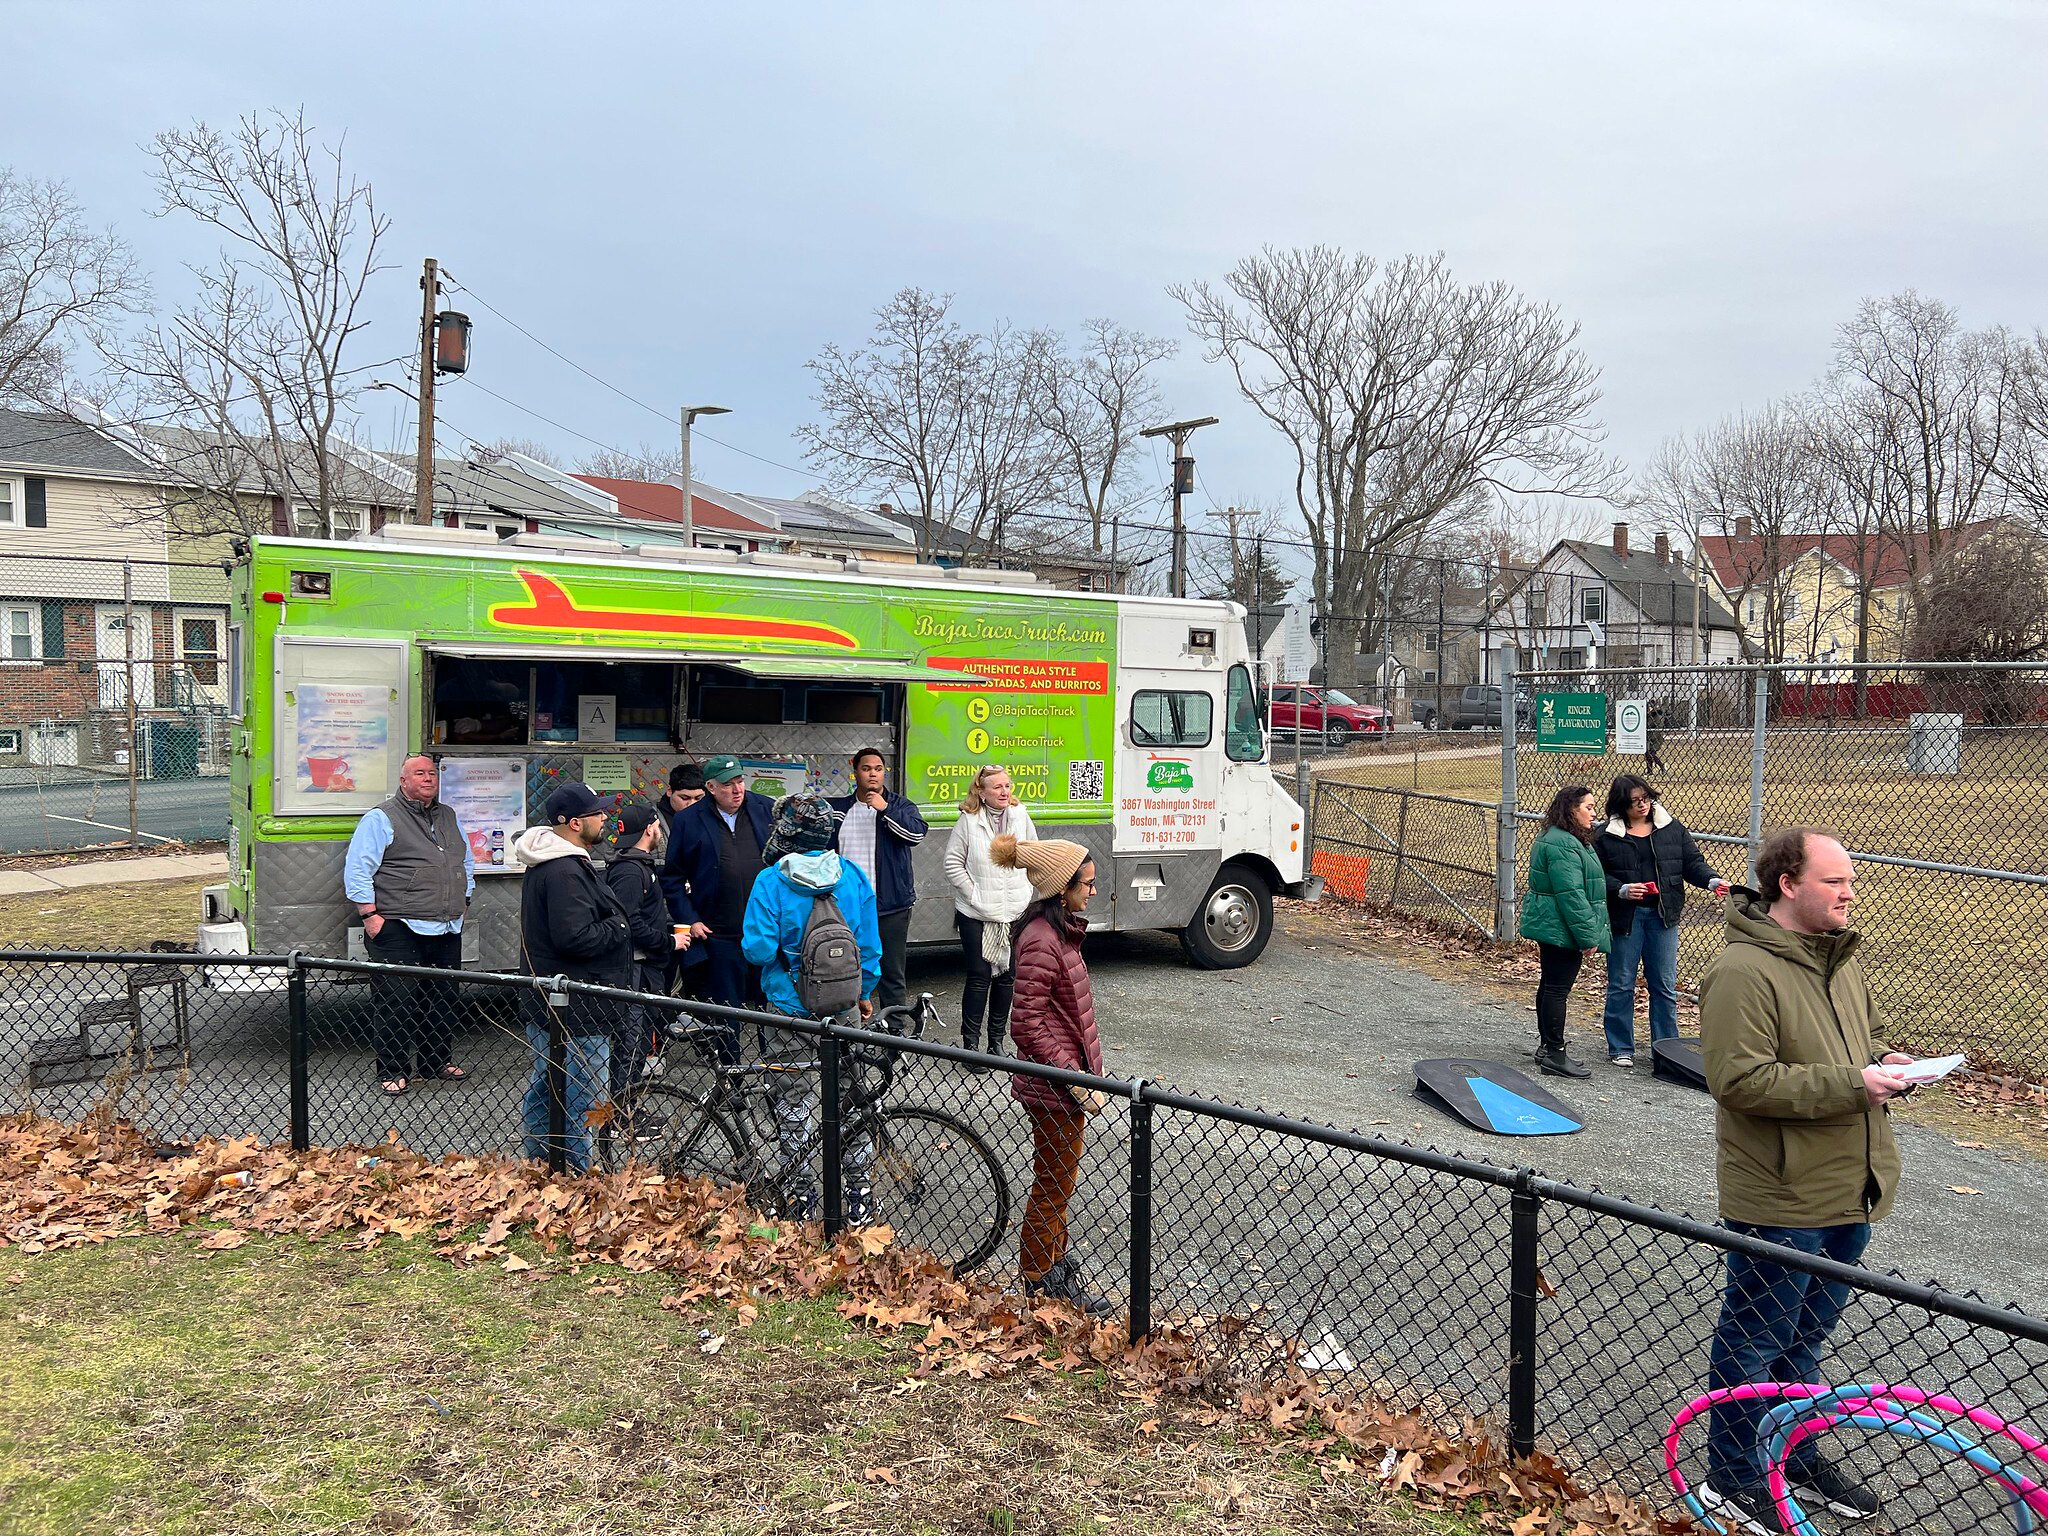 A group of people stand in front of a food truck mingling and playing cornhole